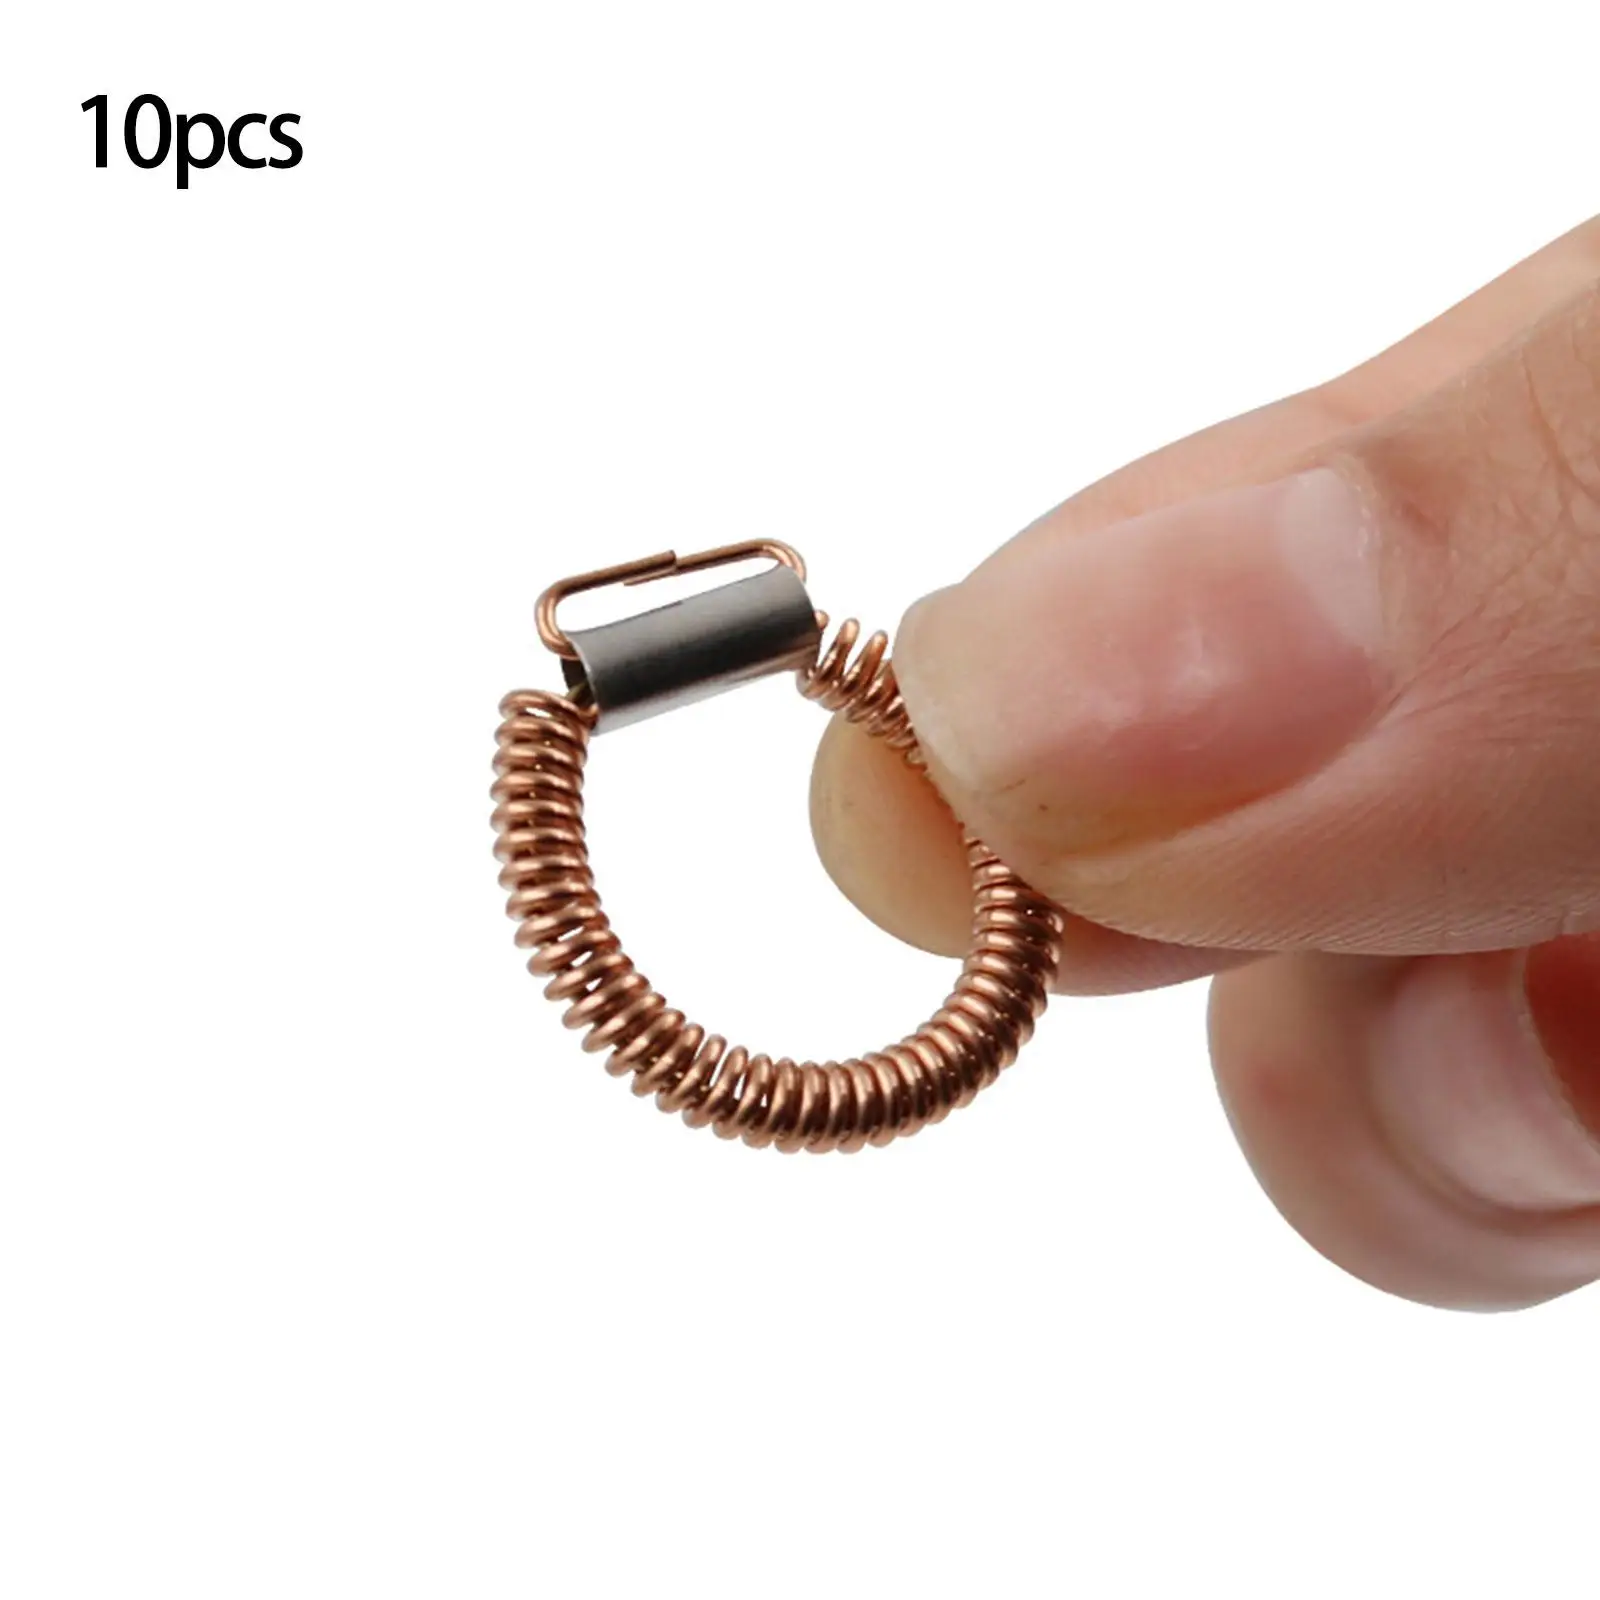 10 Pieces Tension Springs Replacement for Electric Angle Grinder Easily Install Made of Copper, Stainless Steel Professional